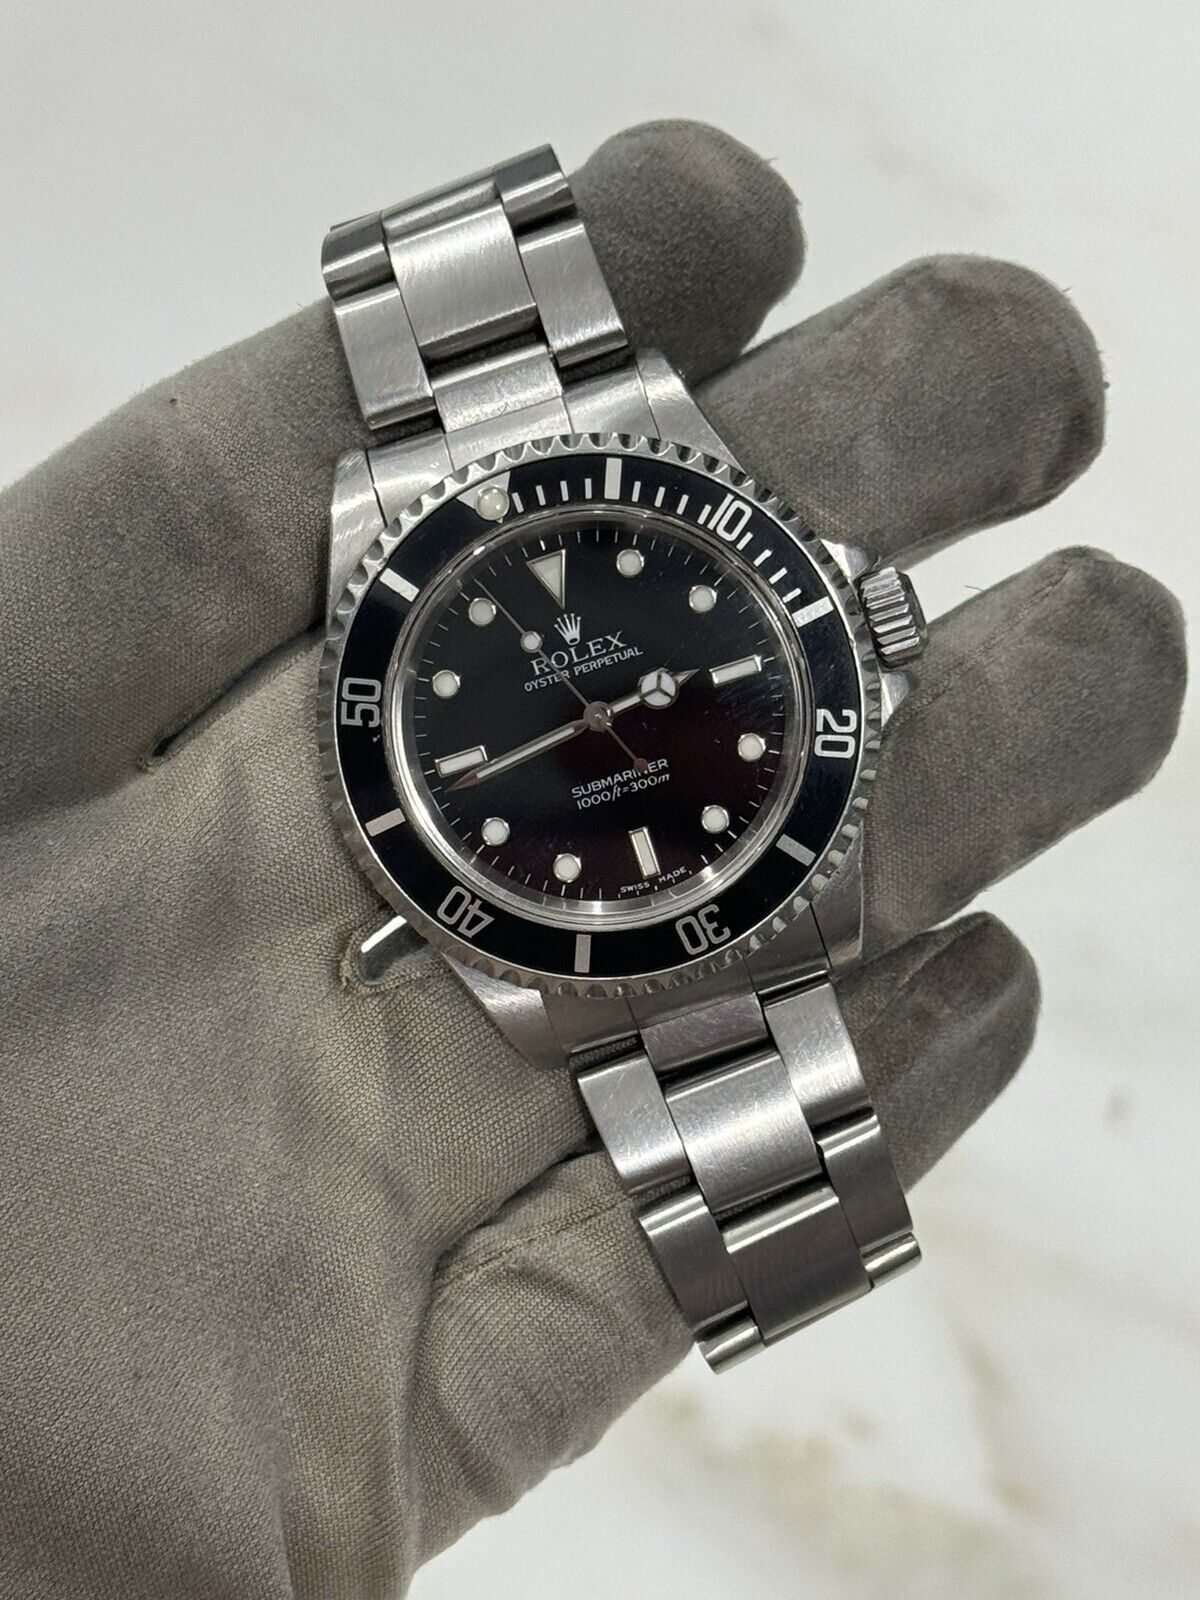 Rolex Submariner No Date 14060 Black Dial 40mm Automatic Watch